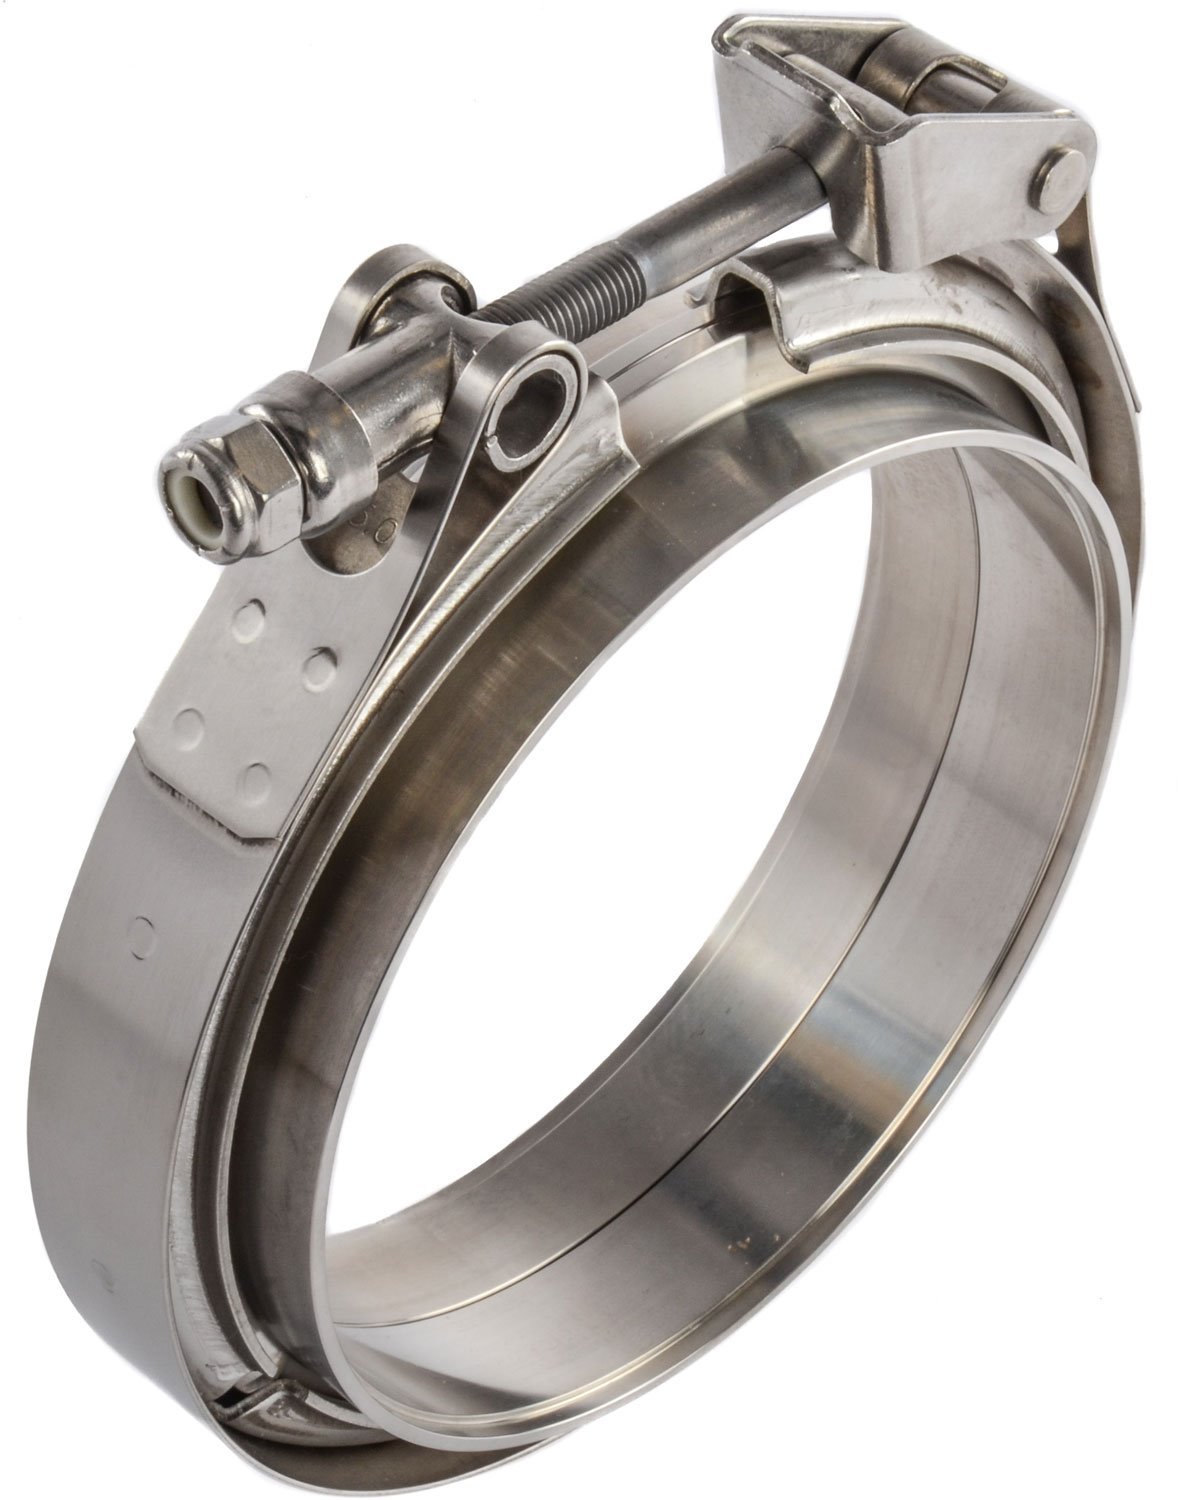 Stainless Steel Quick Release V-Band Clamp & Flanges